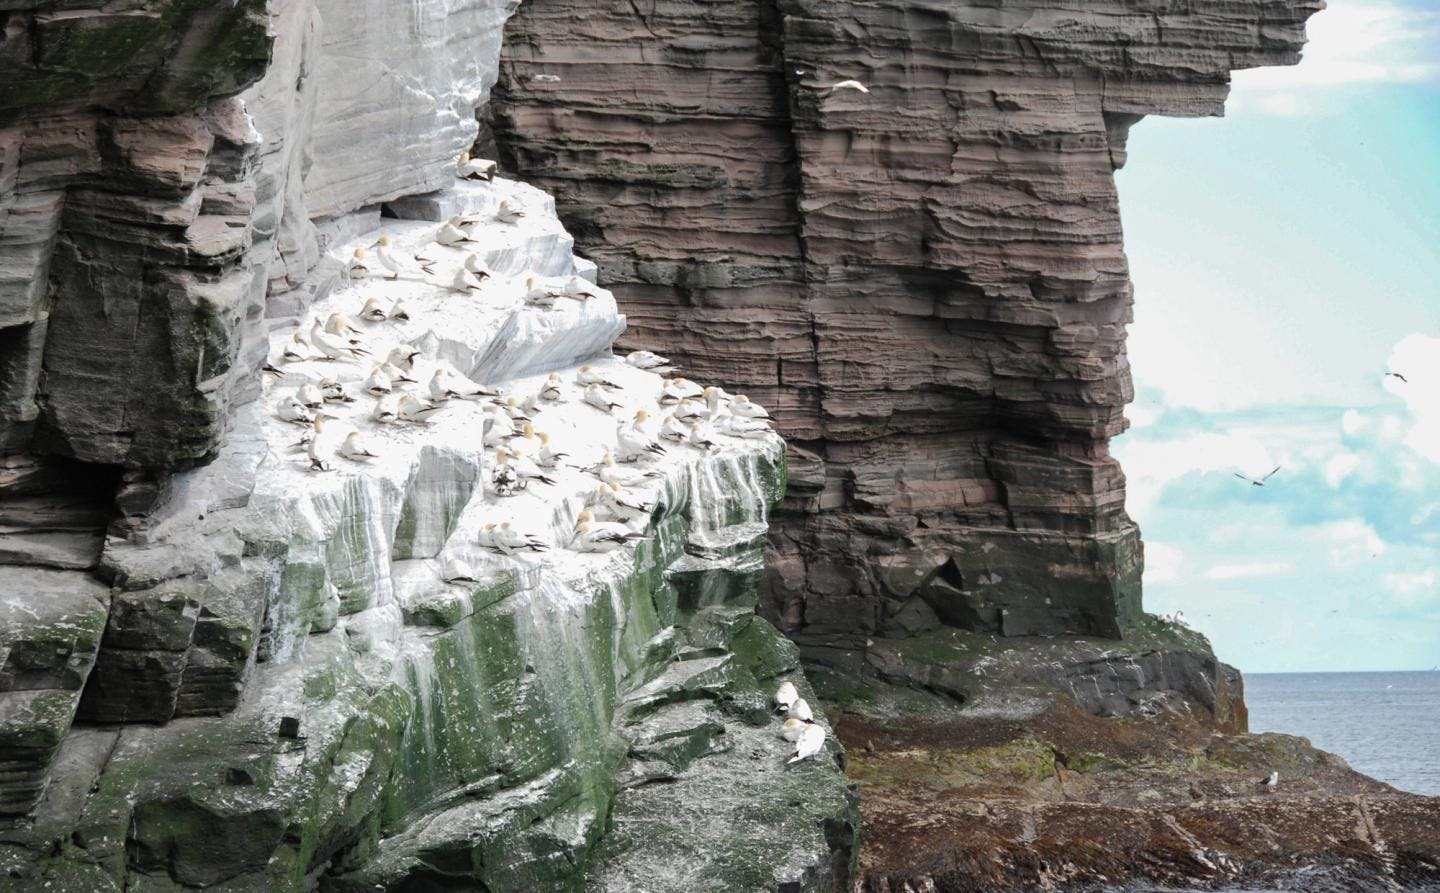 Northern gannets nesting in the cliffs of the island Noss in Shetland. Their guano is coloring the rocks white. Photo: Ronald Toppe